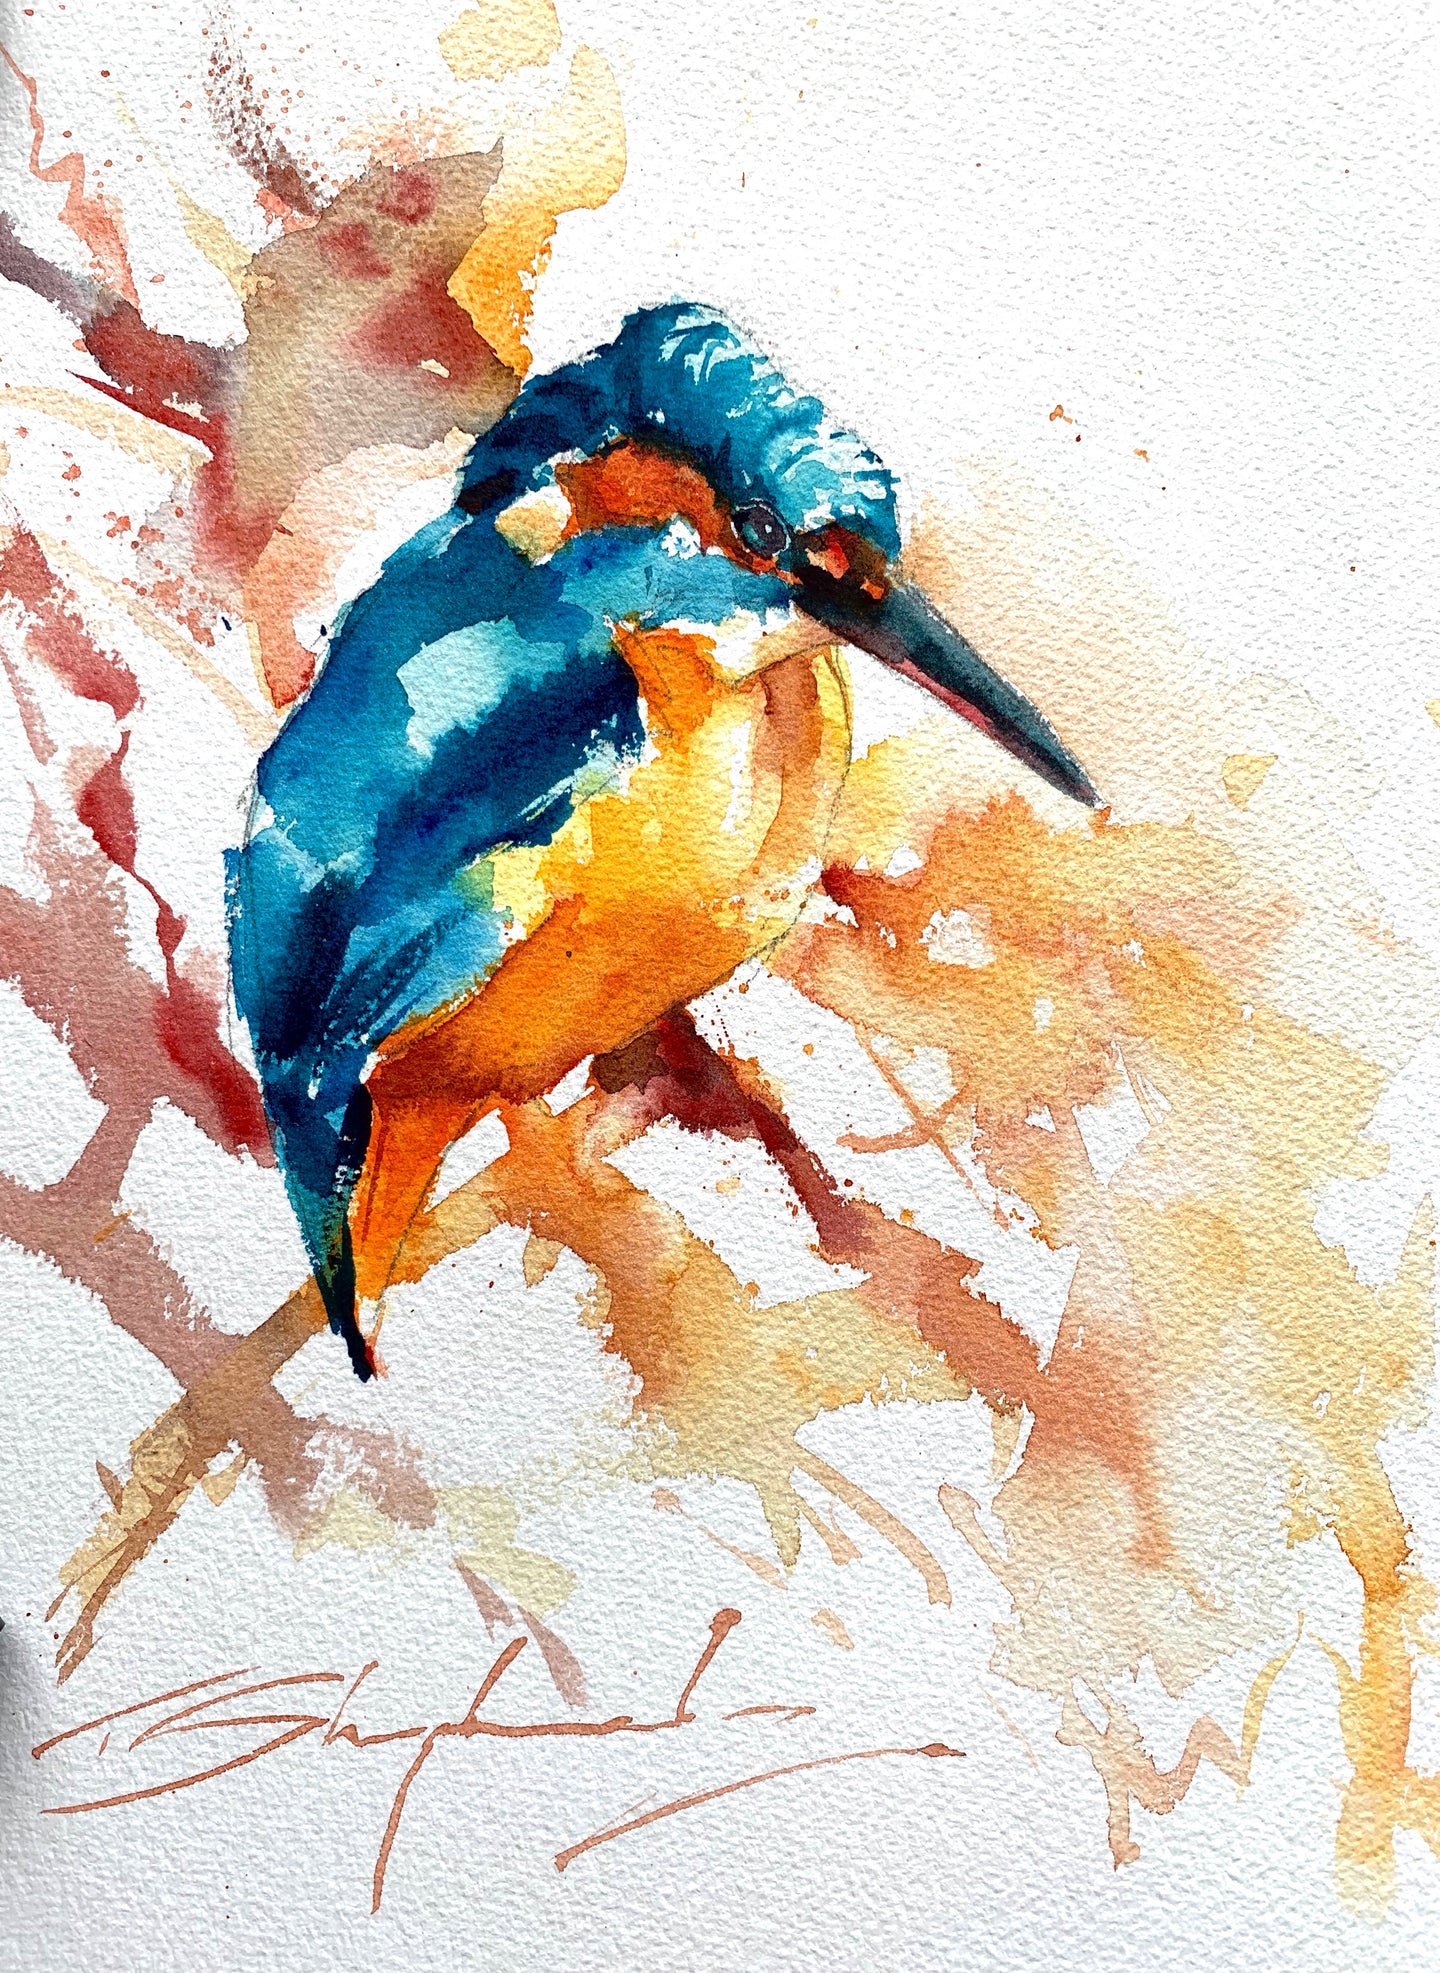 Watercolour painting by Tom Shepherd, depicting a Kingfisher perched amongst undergrowth, waiting for its next victim